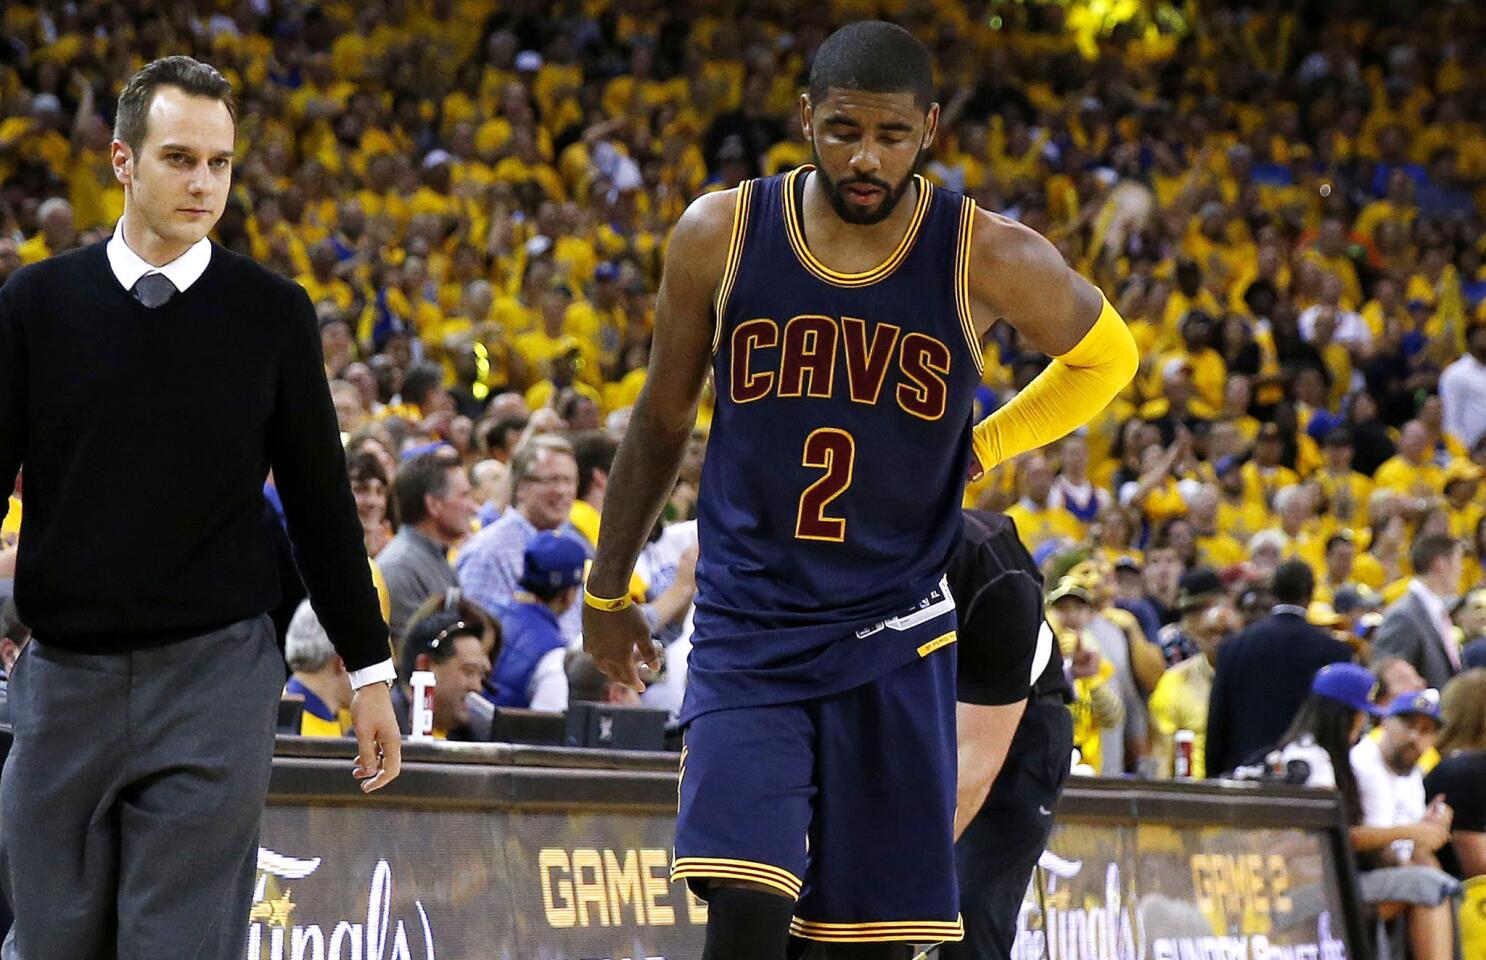 Kyrie Irving's best game gets Cavs back into Finals